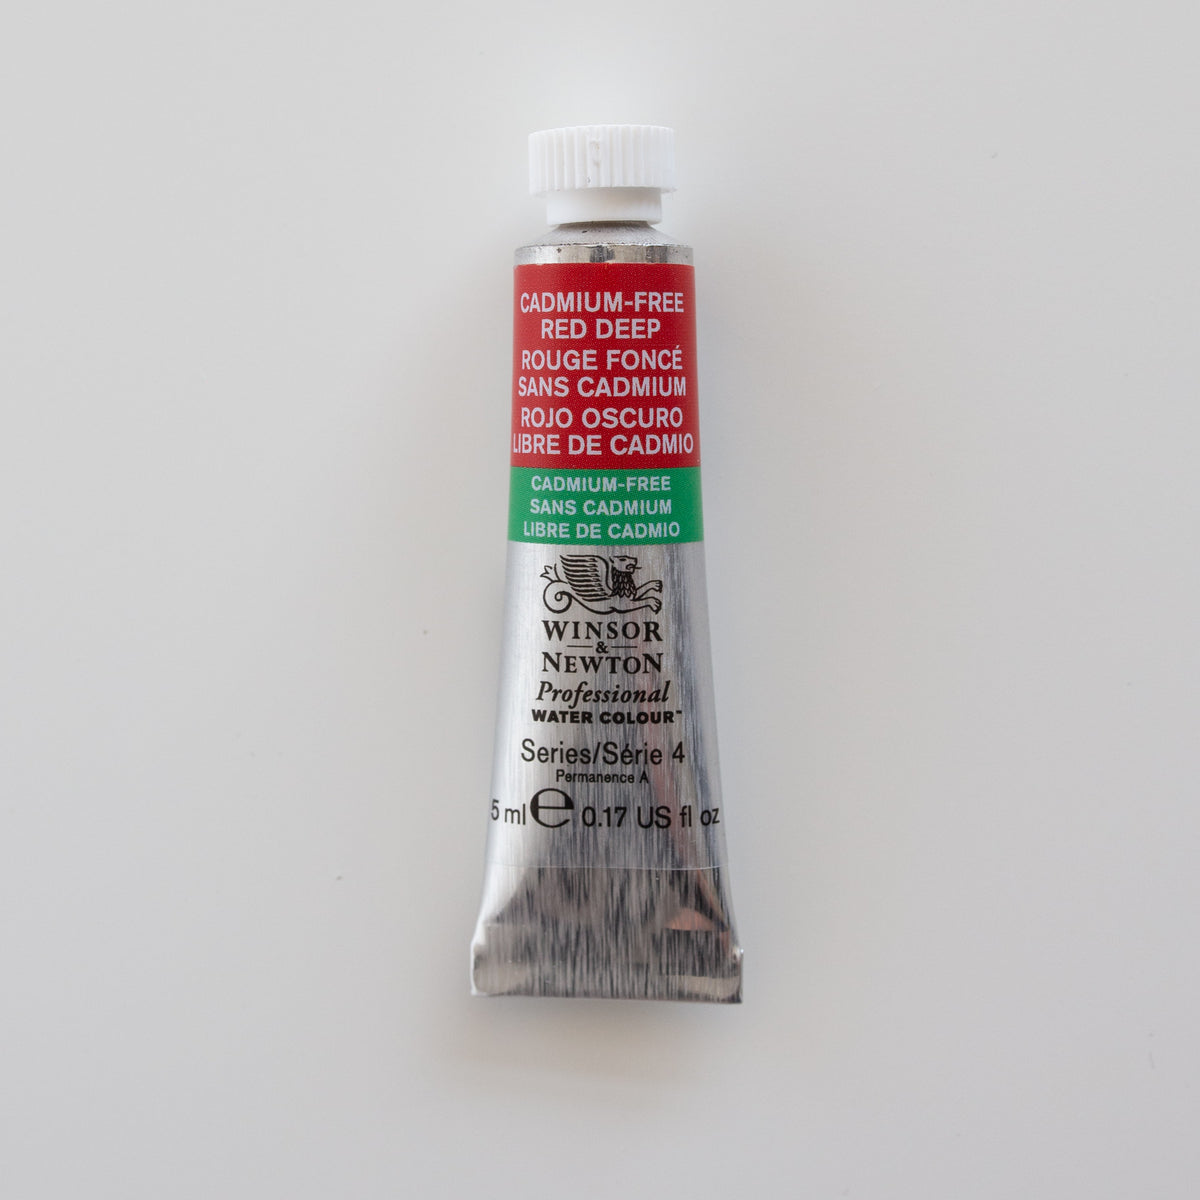 Winsor & Newton Professional Water Colours 5ml Cadmium-Free Red Deep 4